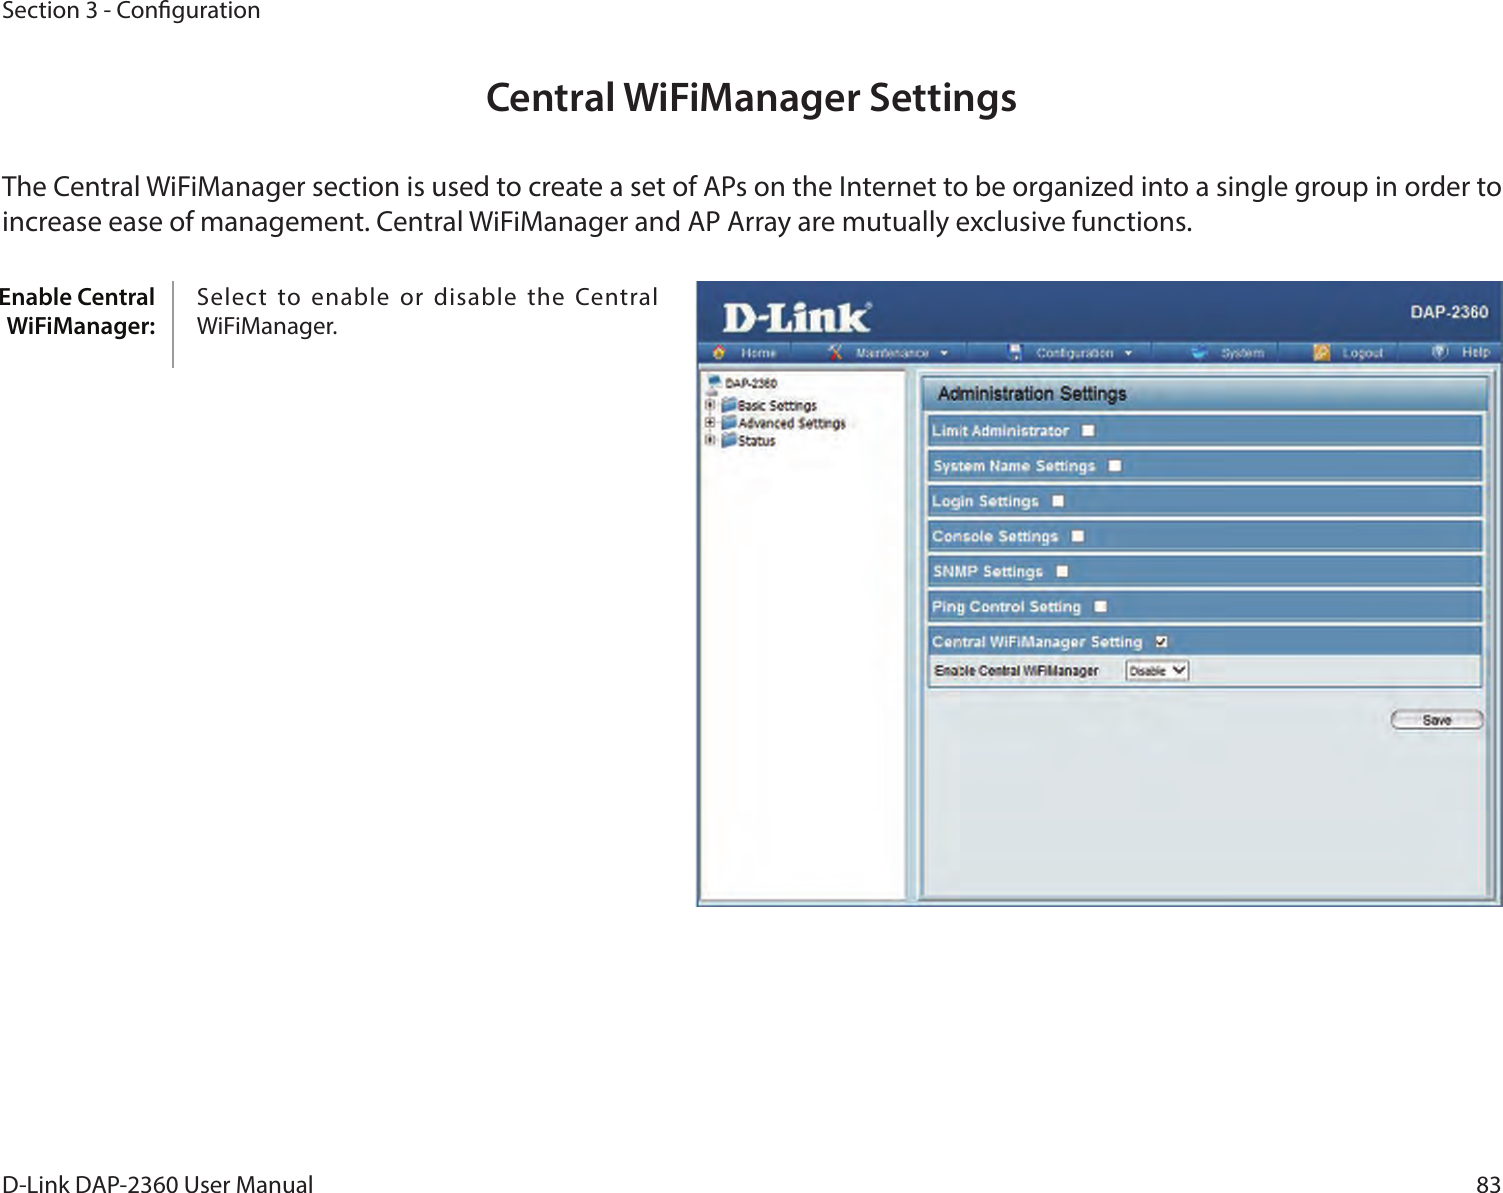 83D-Link DAP-2360 User ManualSection 3 - CongurationEnable Central WiFiManager:Central WiFiManager SettingsThe Central WiFiManager section is used to create a set of APs on the Internet to be organized into a single group in order to increase ease of management. Central WiFiManager and AP Array are mutually exclusive functions.Select  to enable  or disable  the Central WiFiManager.